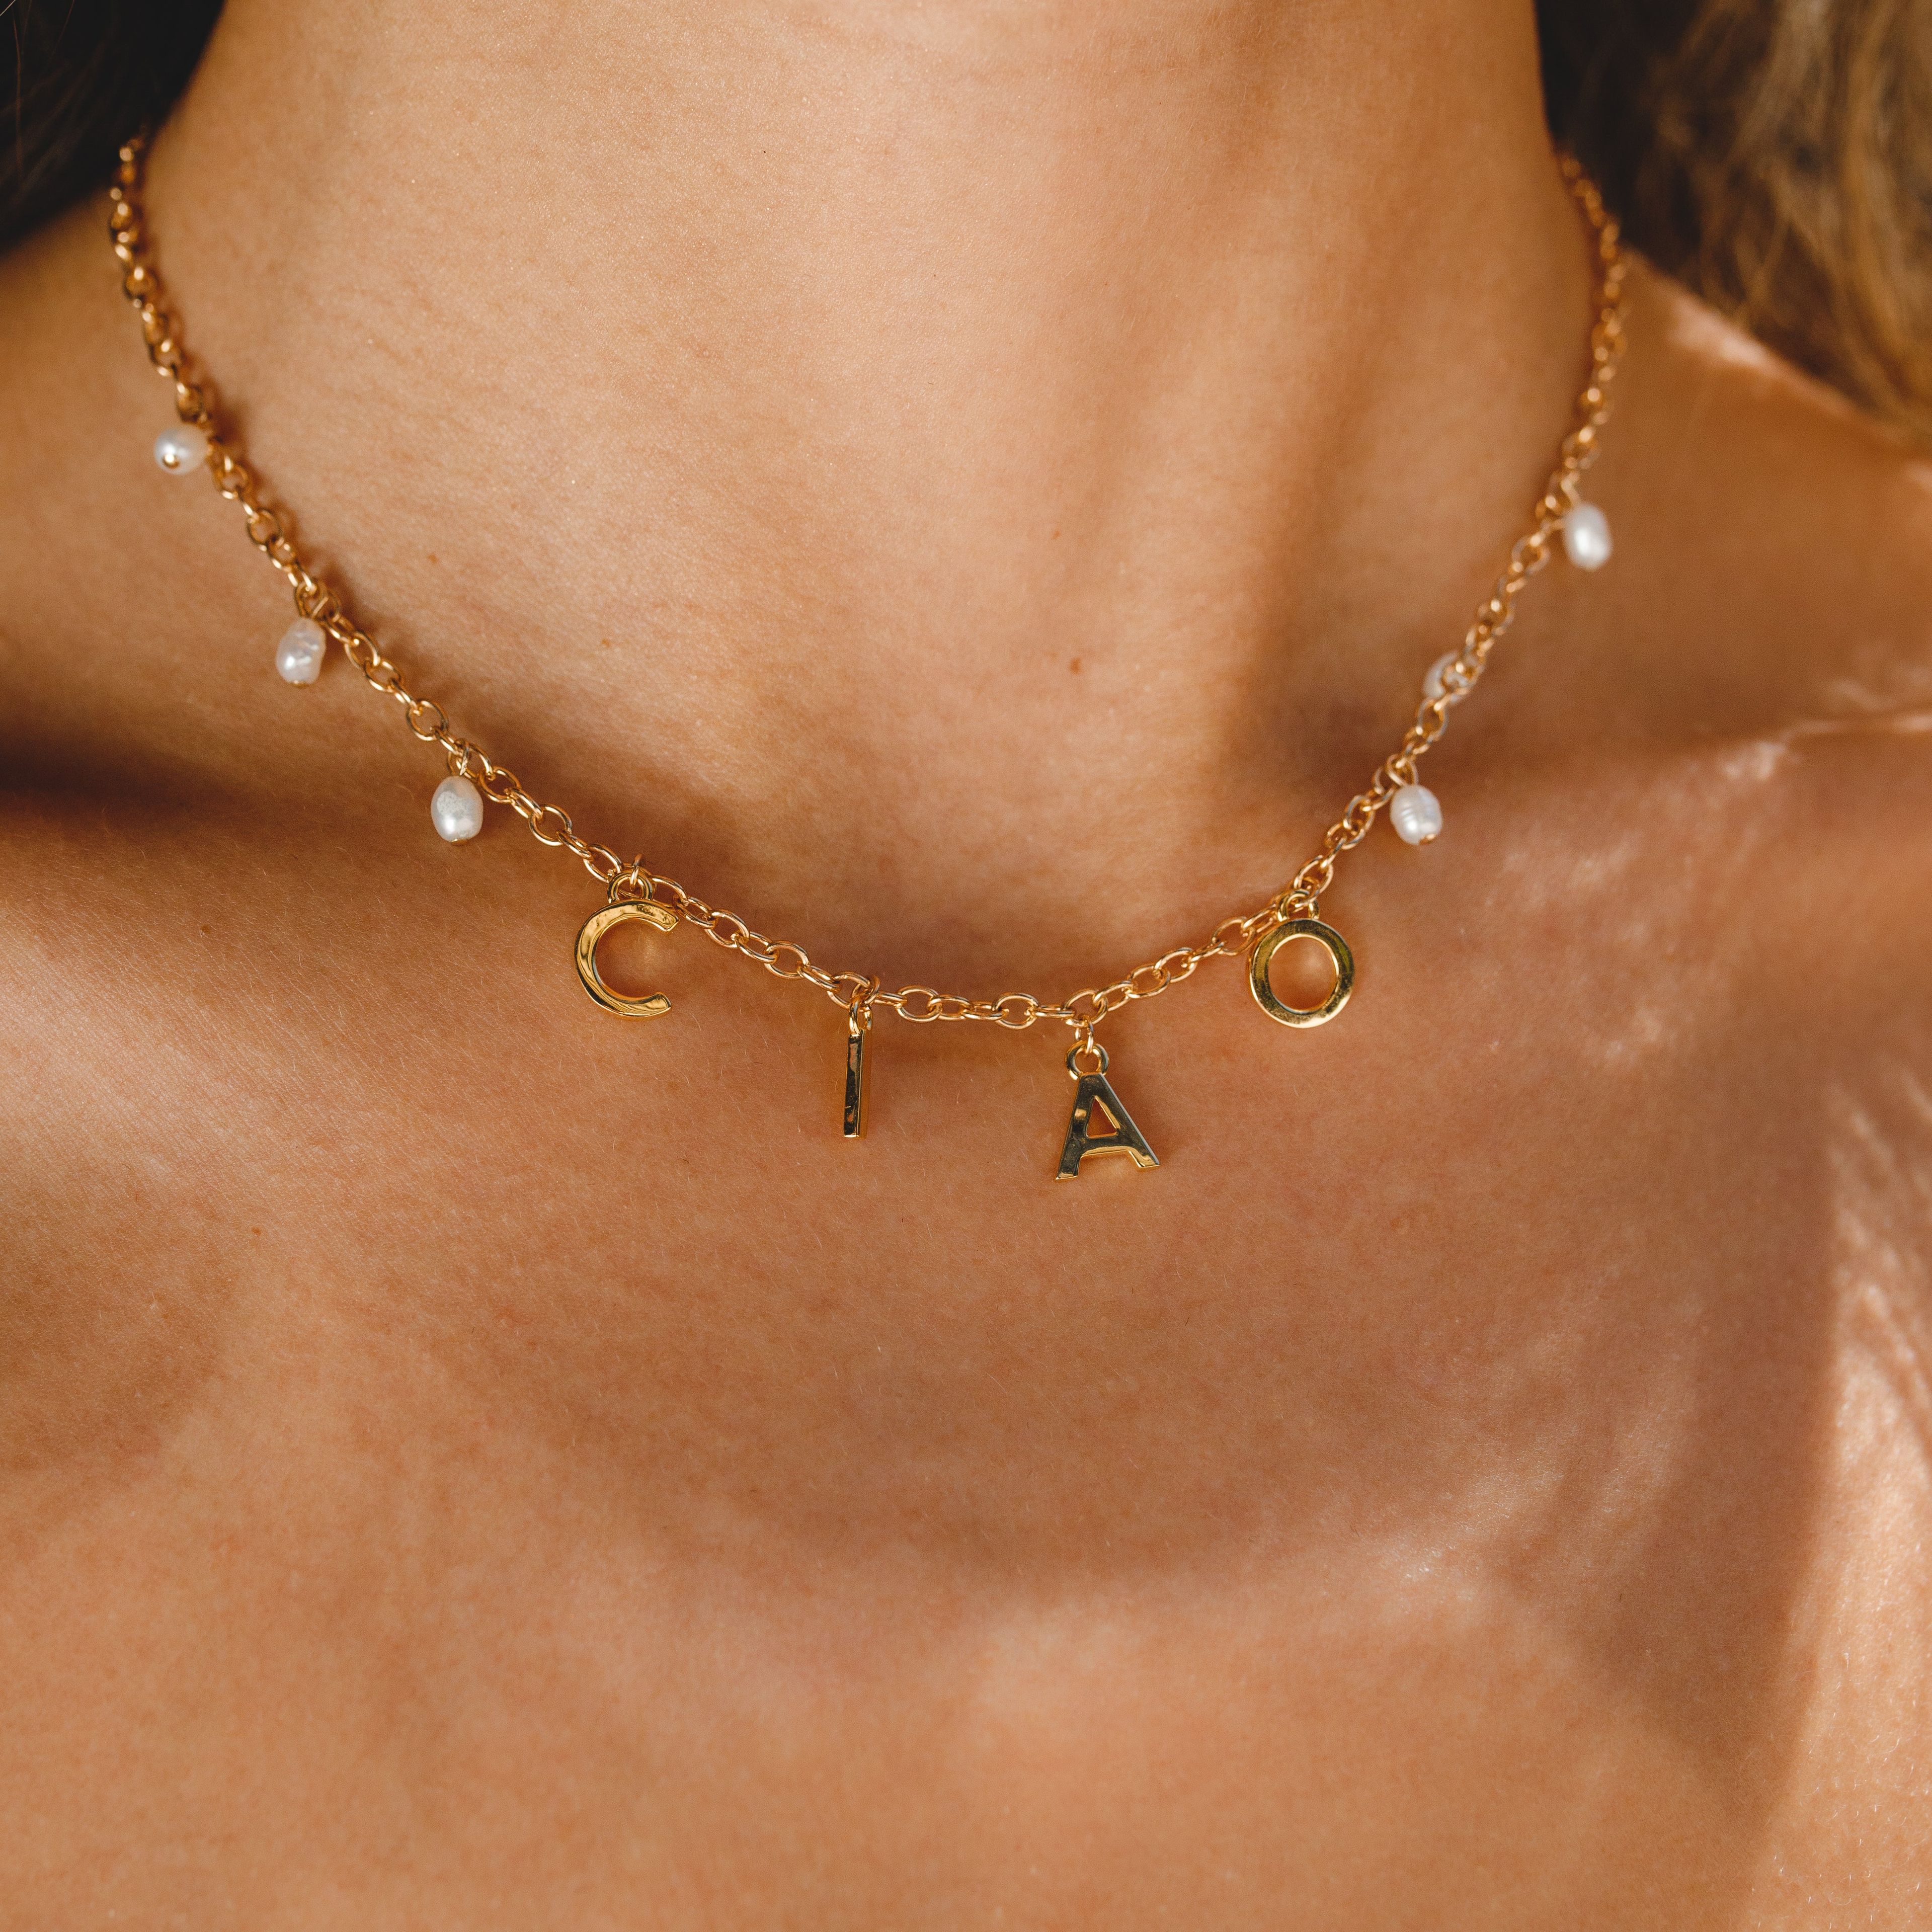 The Ciao Pearl Necklace